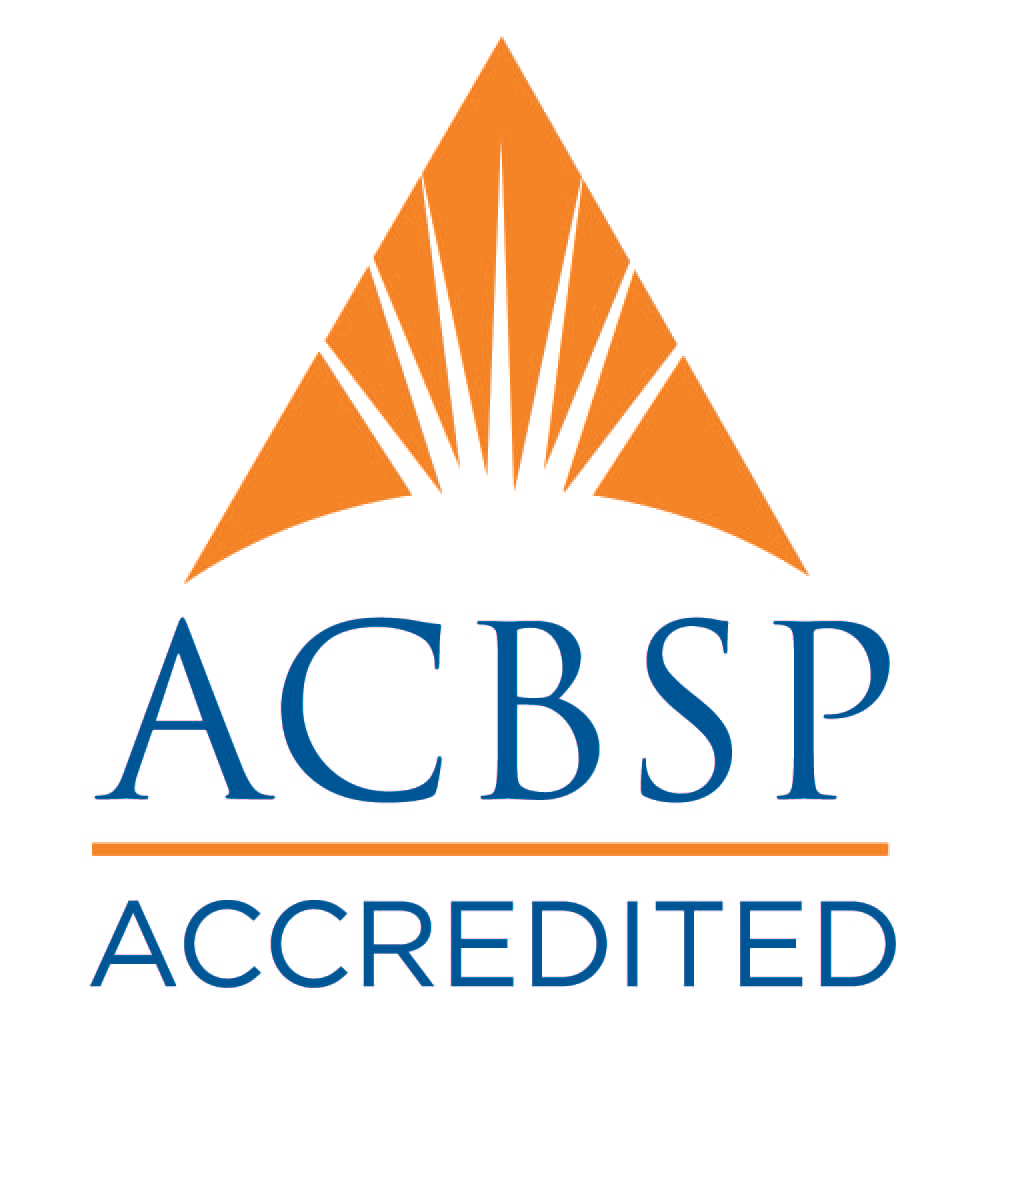 ACBSP_Accredited (003).png